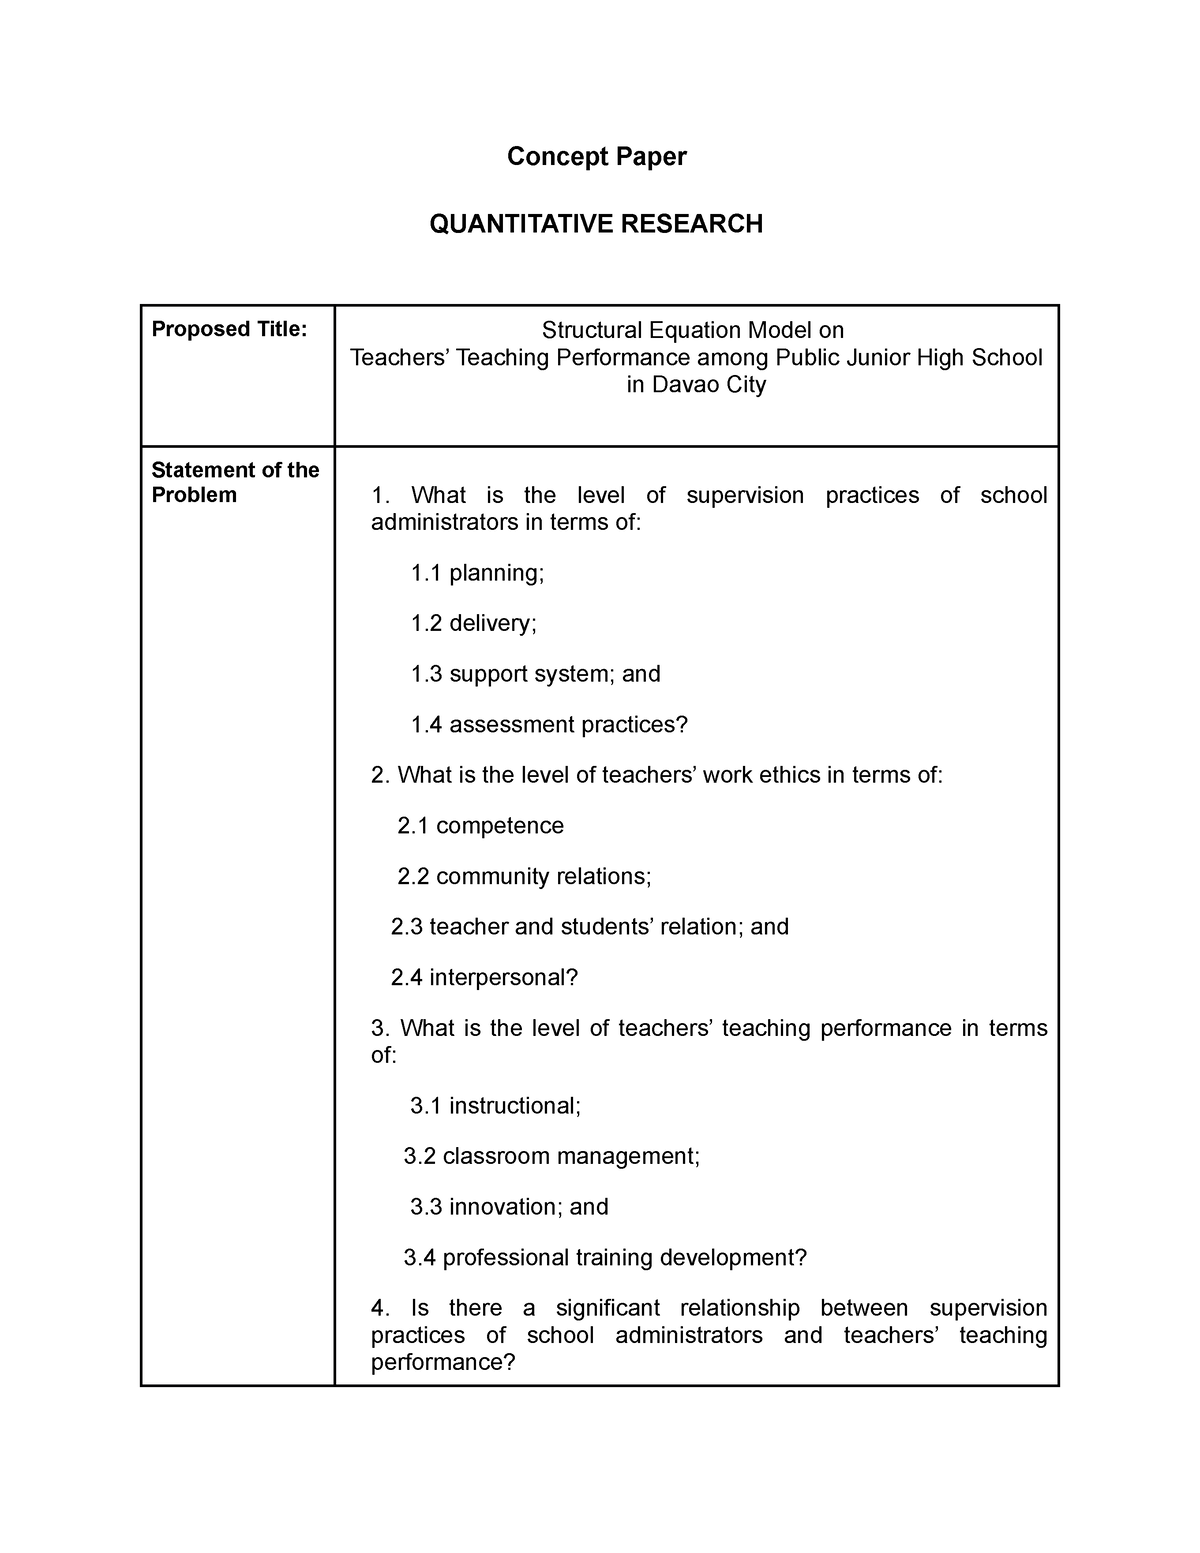 research questions concept paper